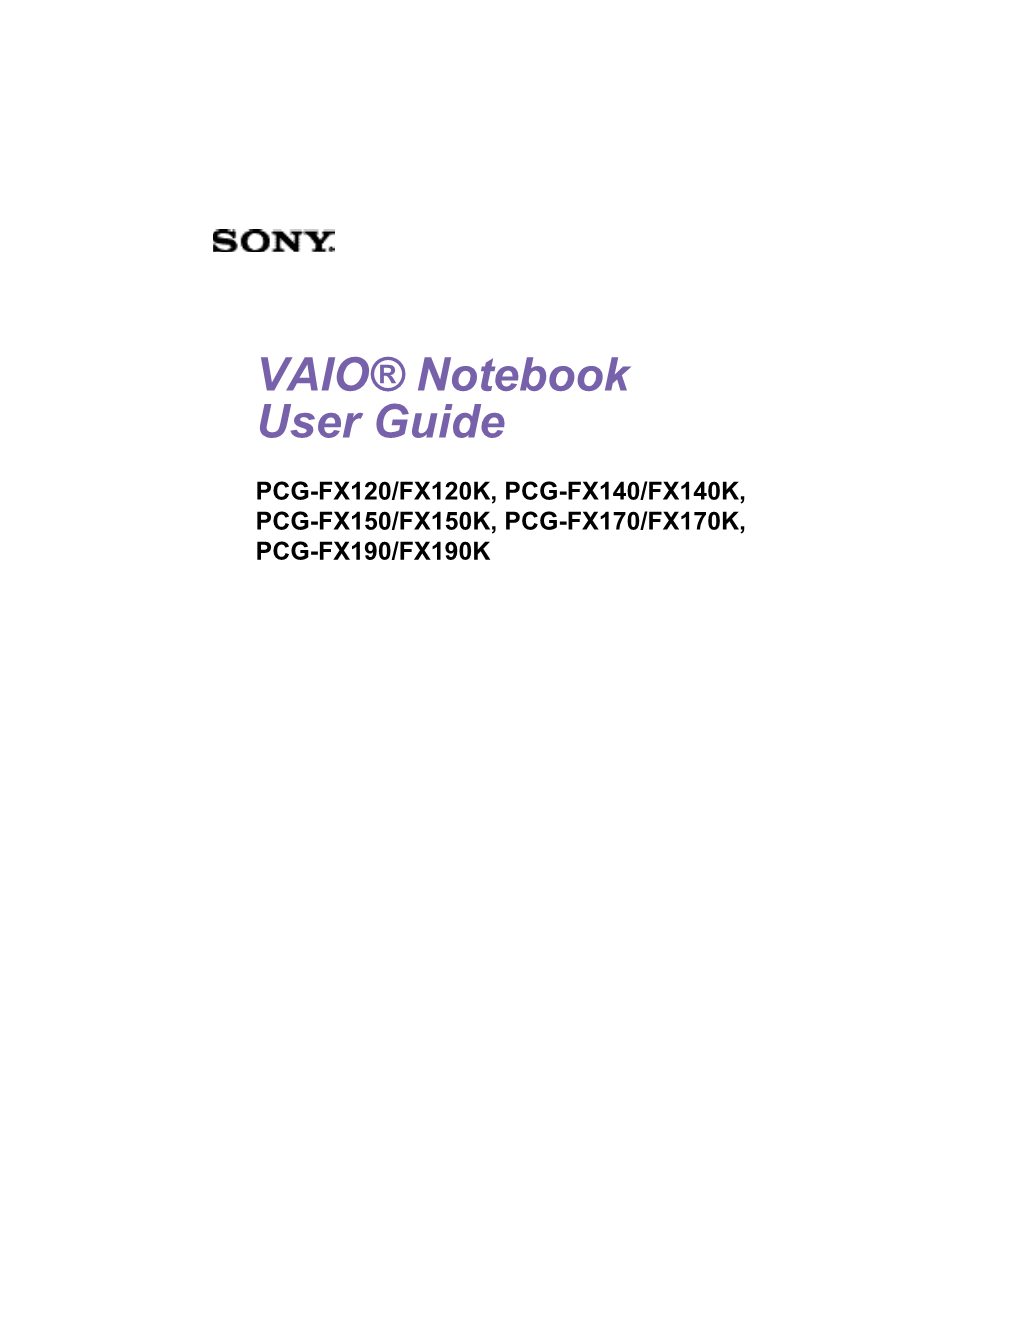 VAIO® Notebook User Guide